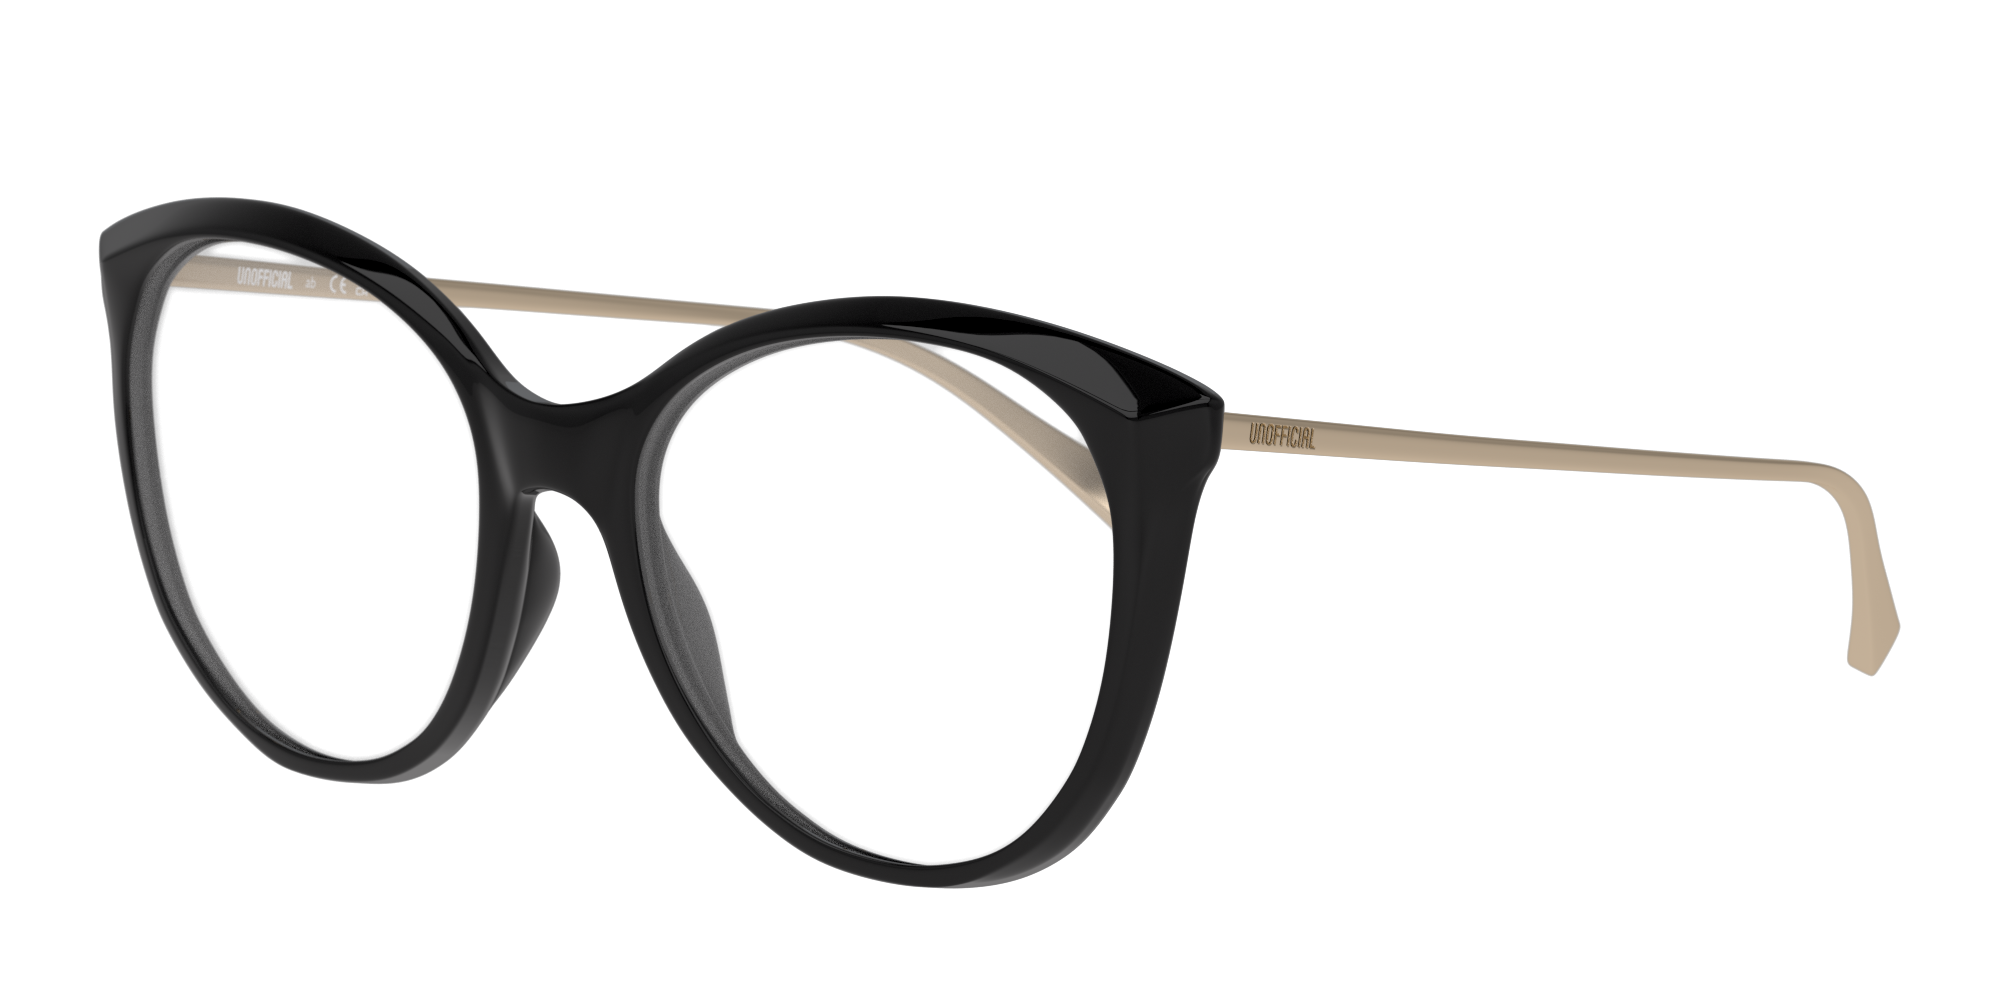 Angle_Left01 Unofficial UO2157 Glasses Transparent / Black